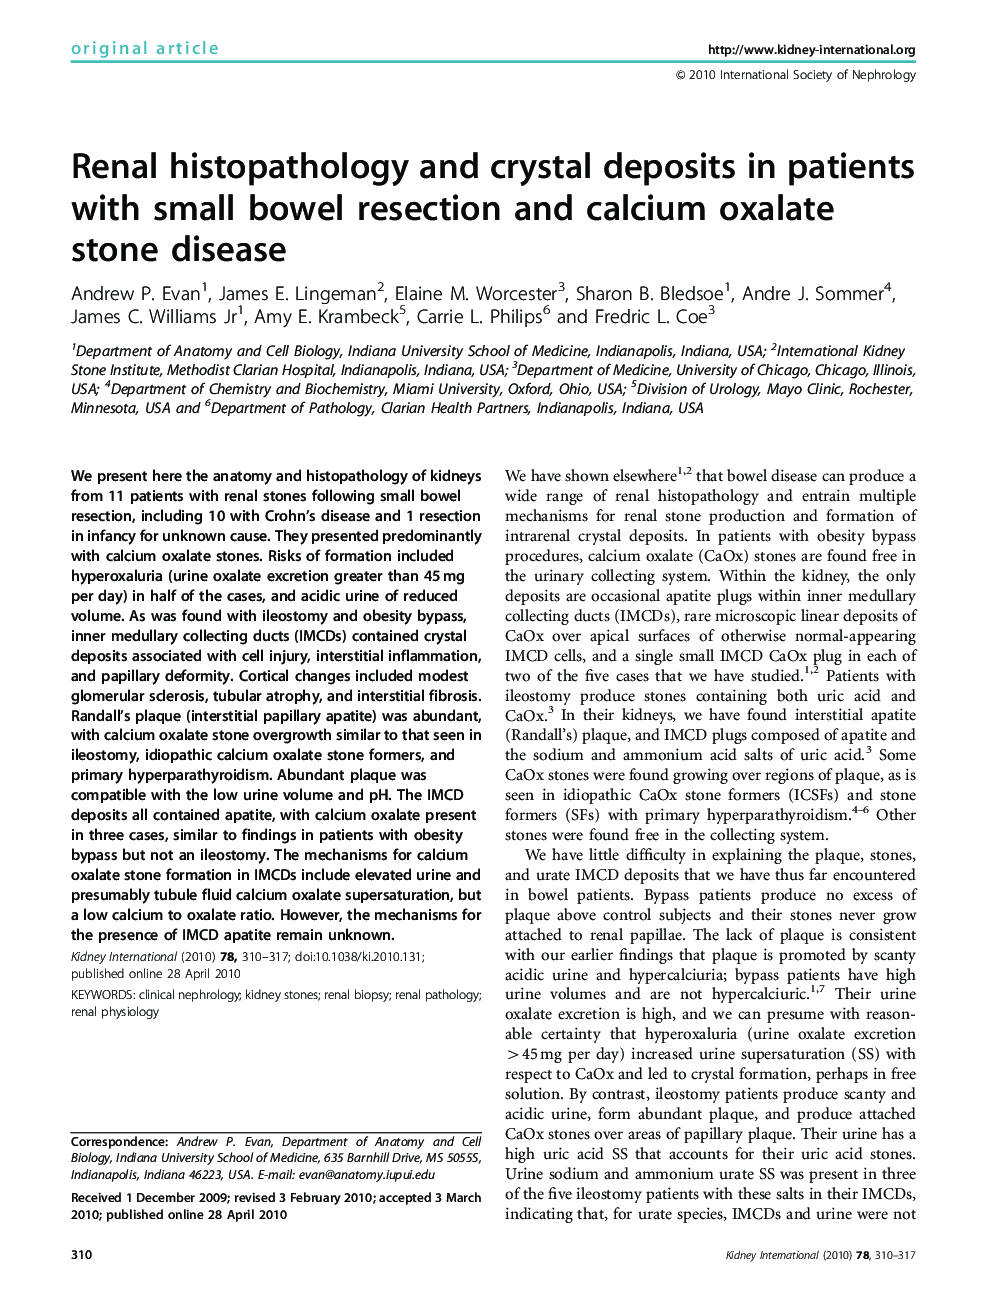 Renal histopathology and crystal deposits in patients with small bowel resection and calcium oxalate stone disease 